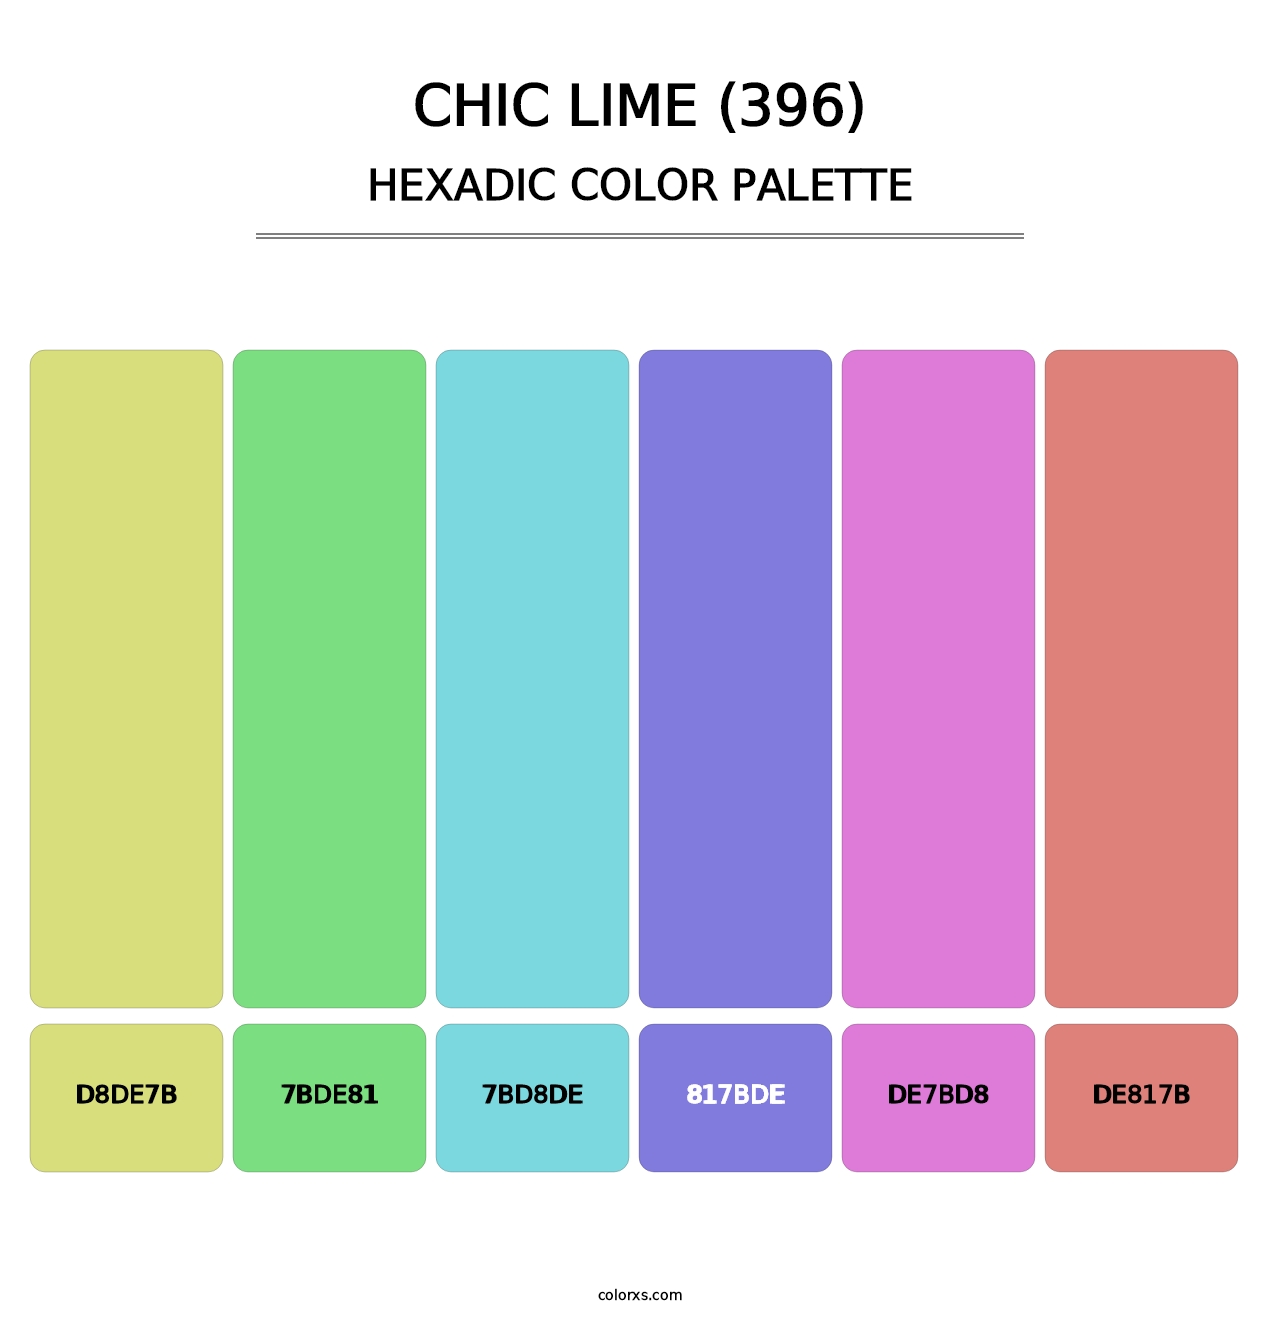 Chic Lime (396) - Hexadic Color Palette